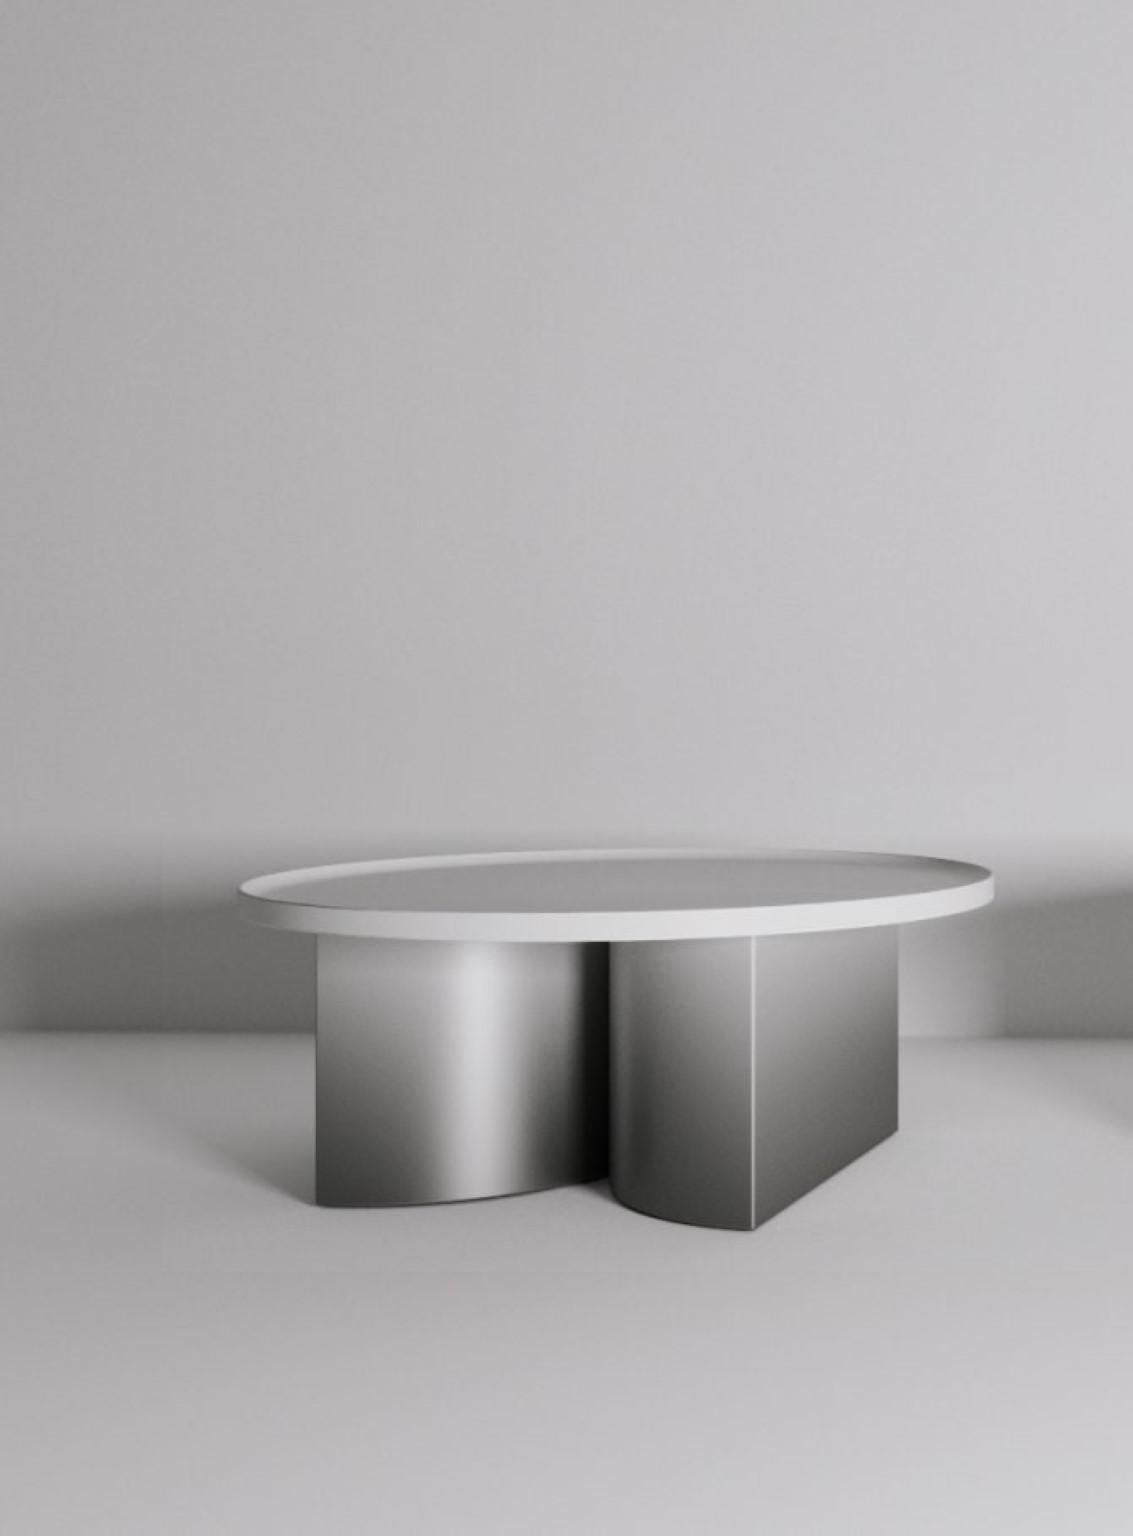 Constantin table by Jirí Krejcirík
Dimensions: 87 x 87 x 42 cm
Material: steel alloys


The tables entitled Odyssey and Kalokagathos represent the dialogue between the aesthetics of ancient Greece and the aesthetics of Slovene architect Josip